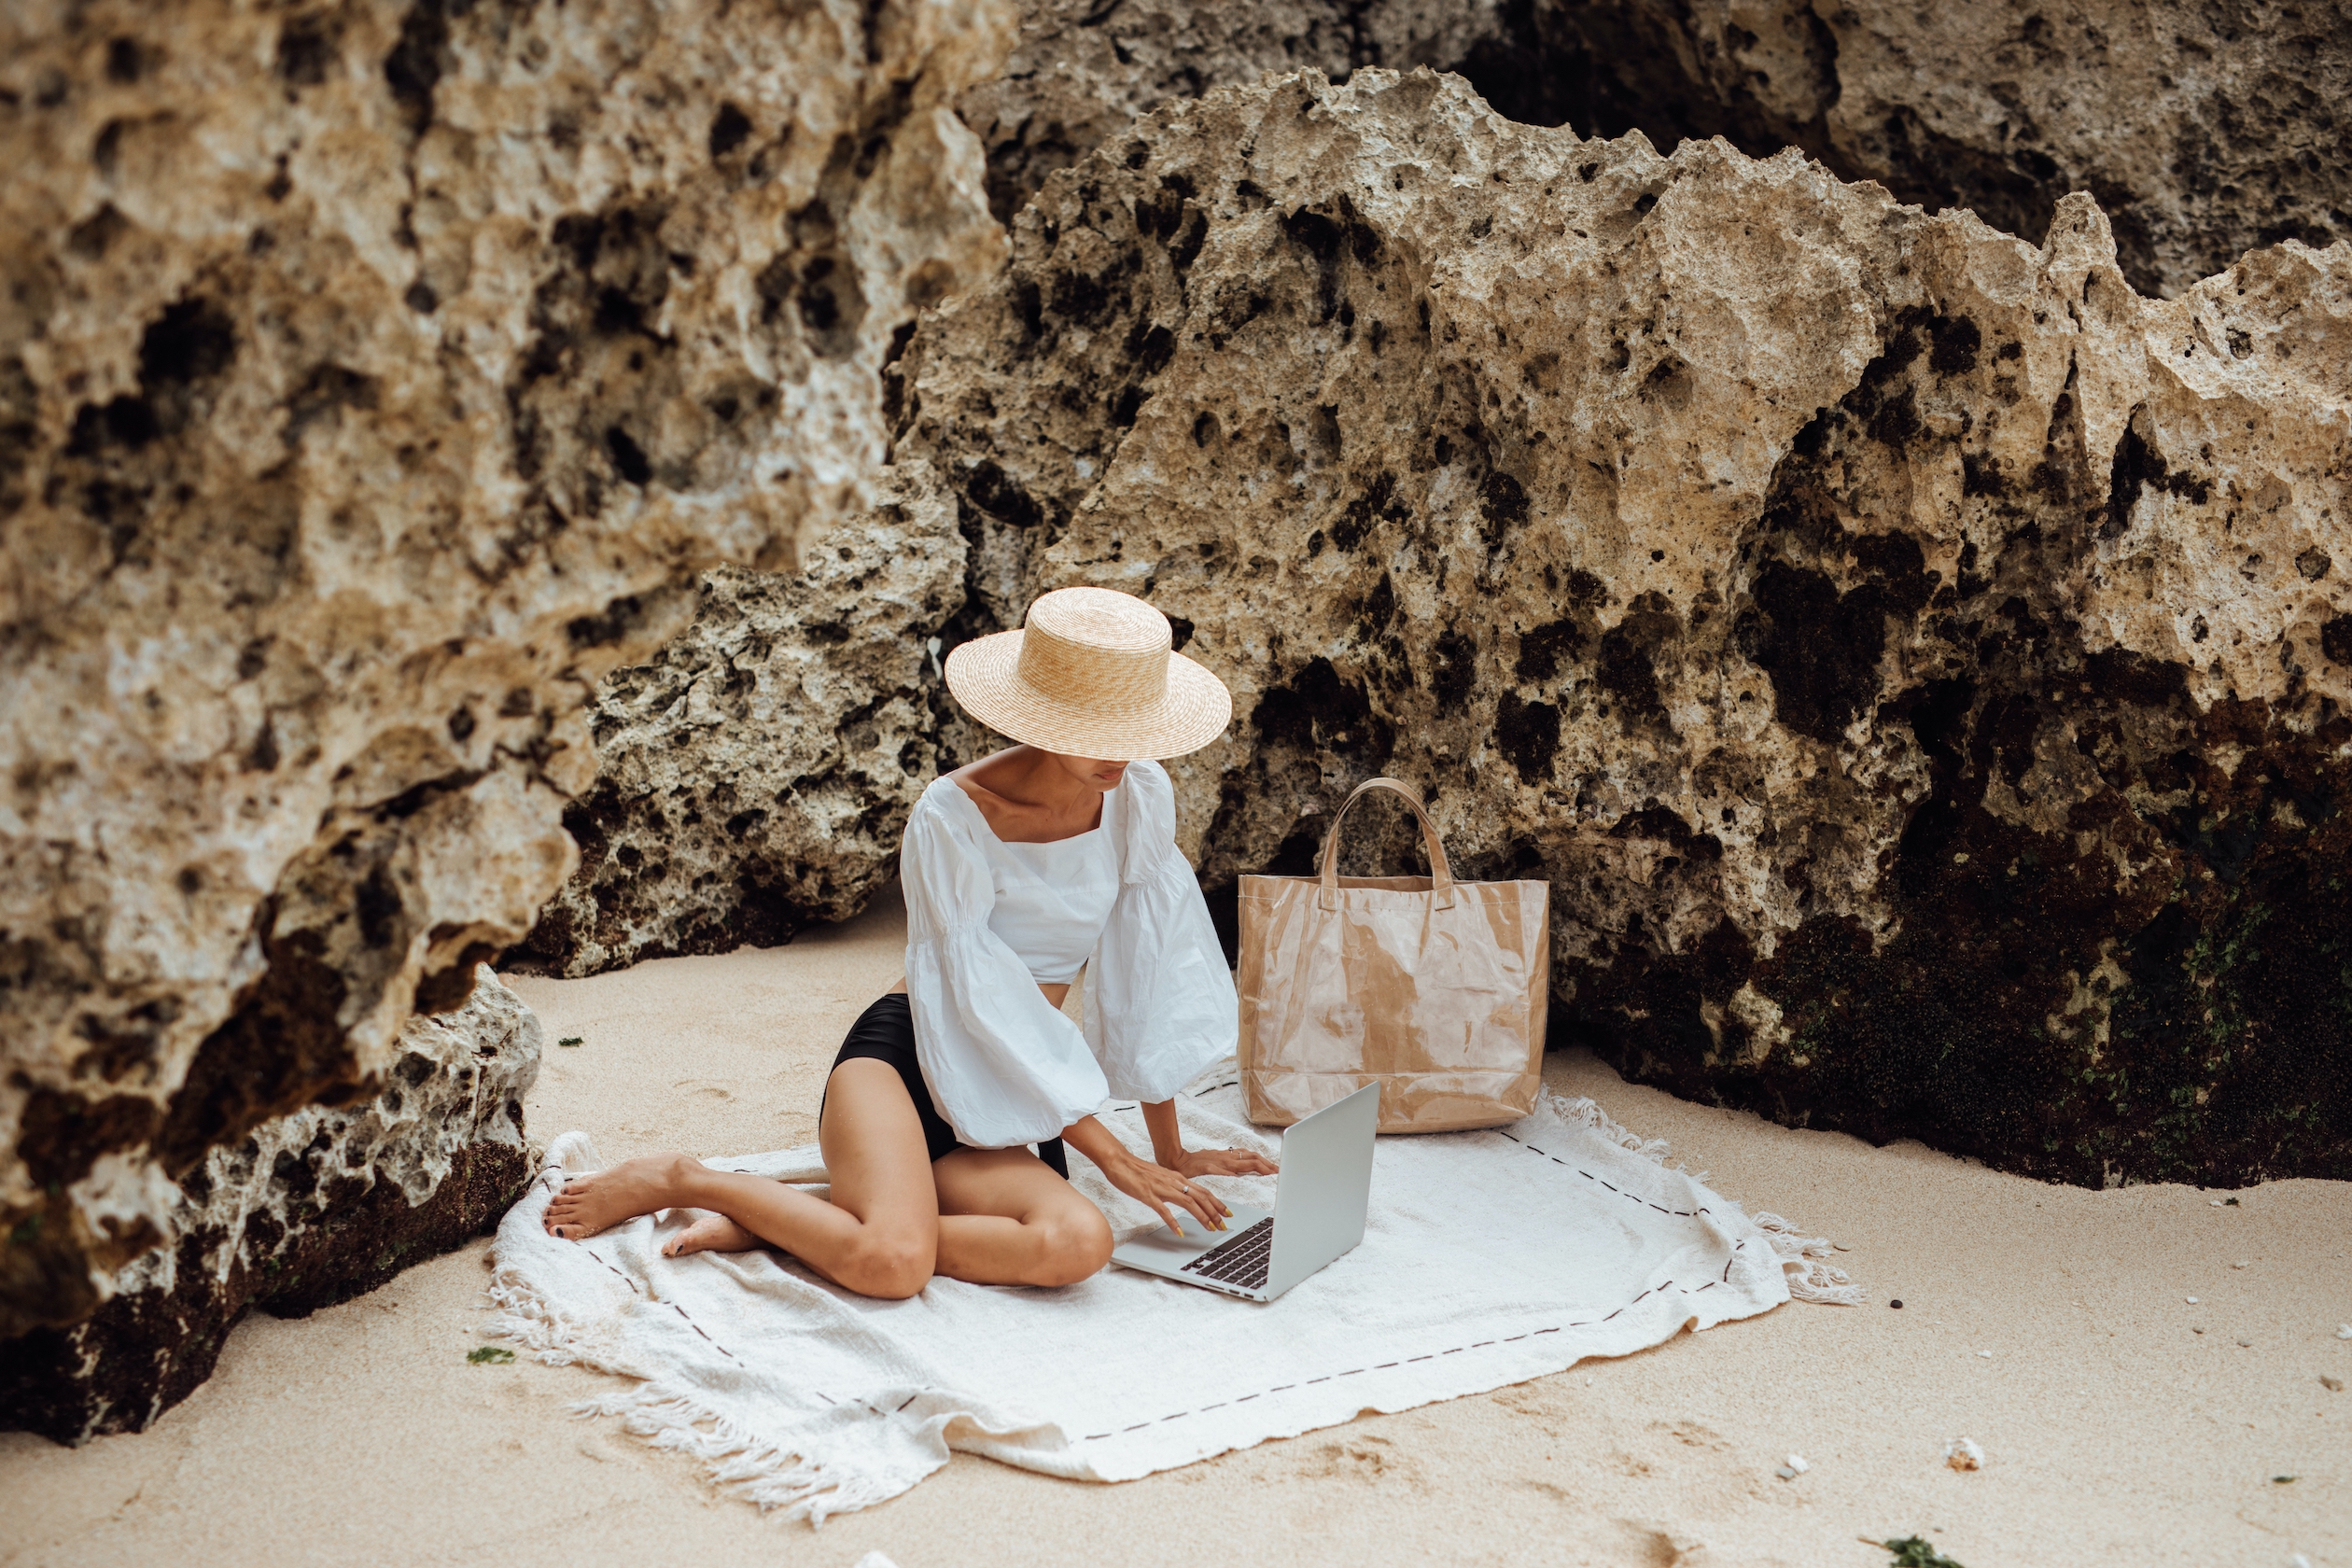 Image of a person reading on their laptop while relaxing at a beach.